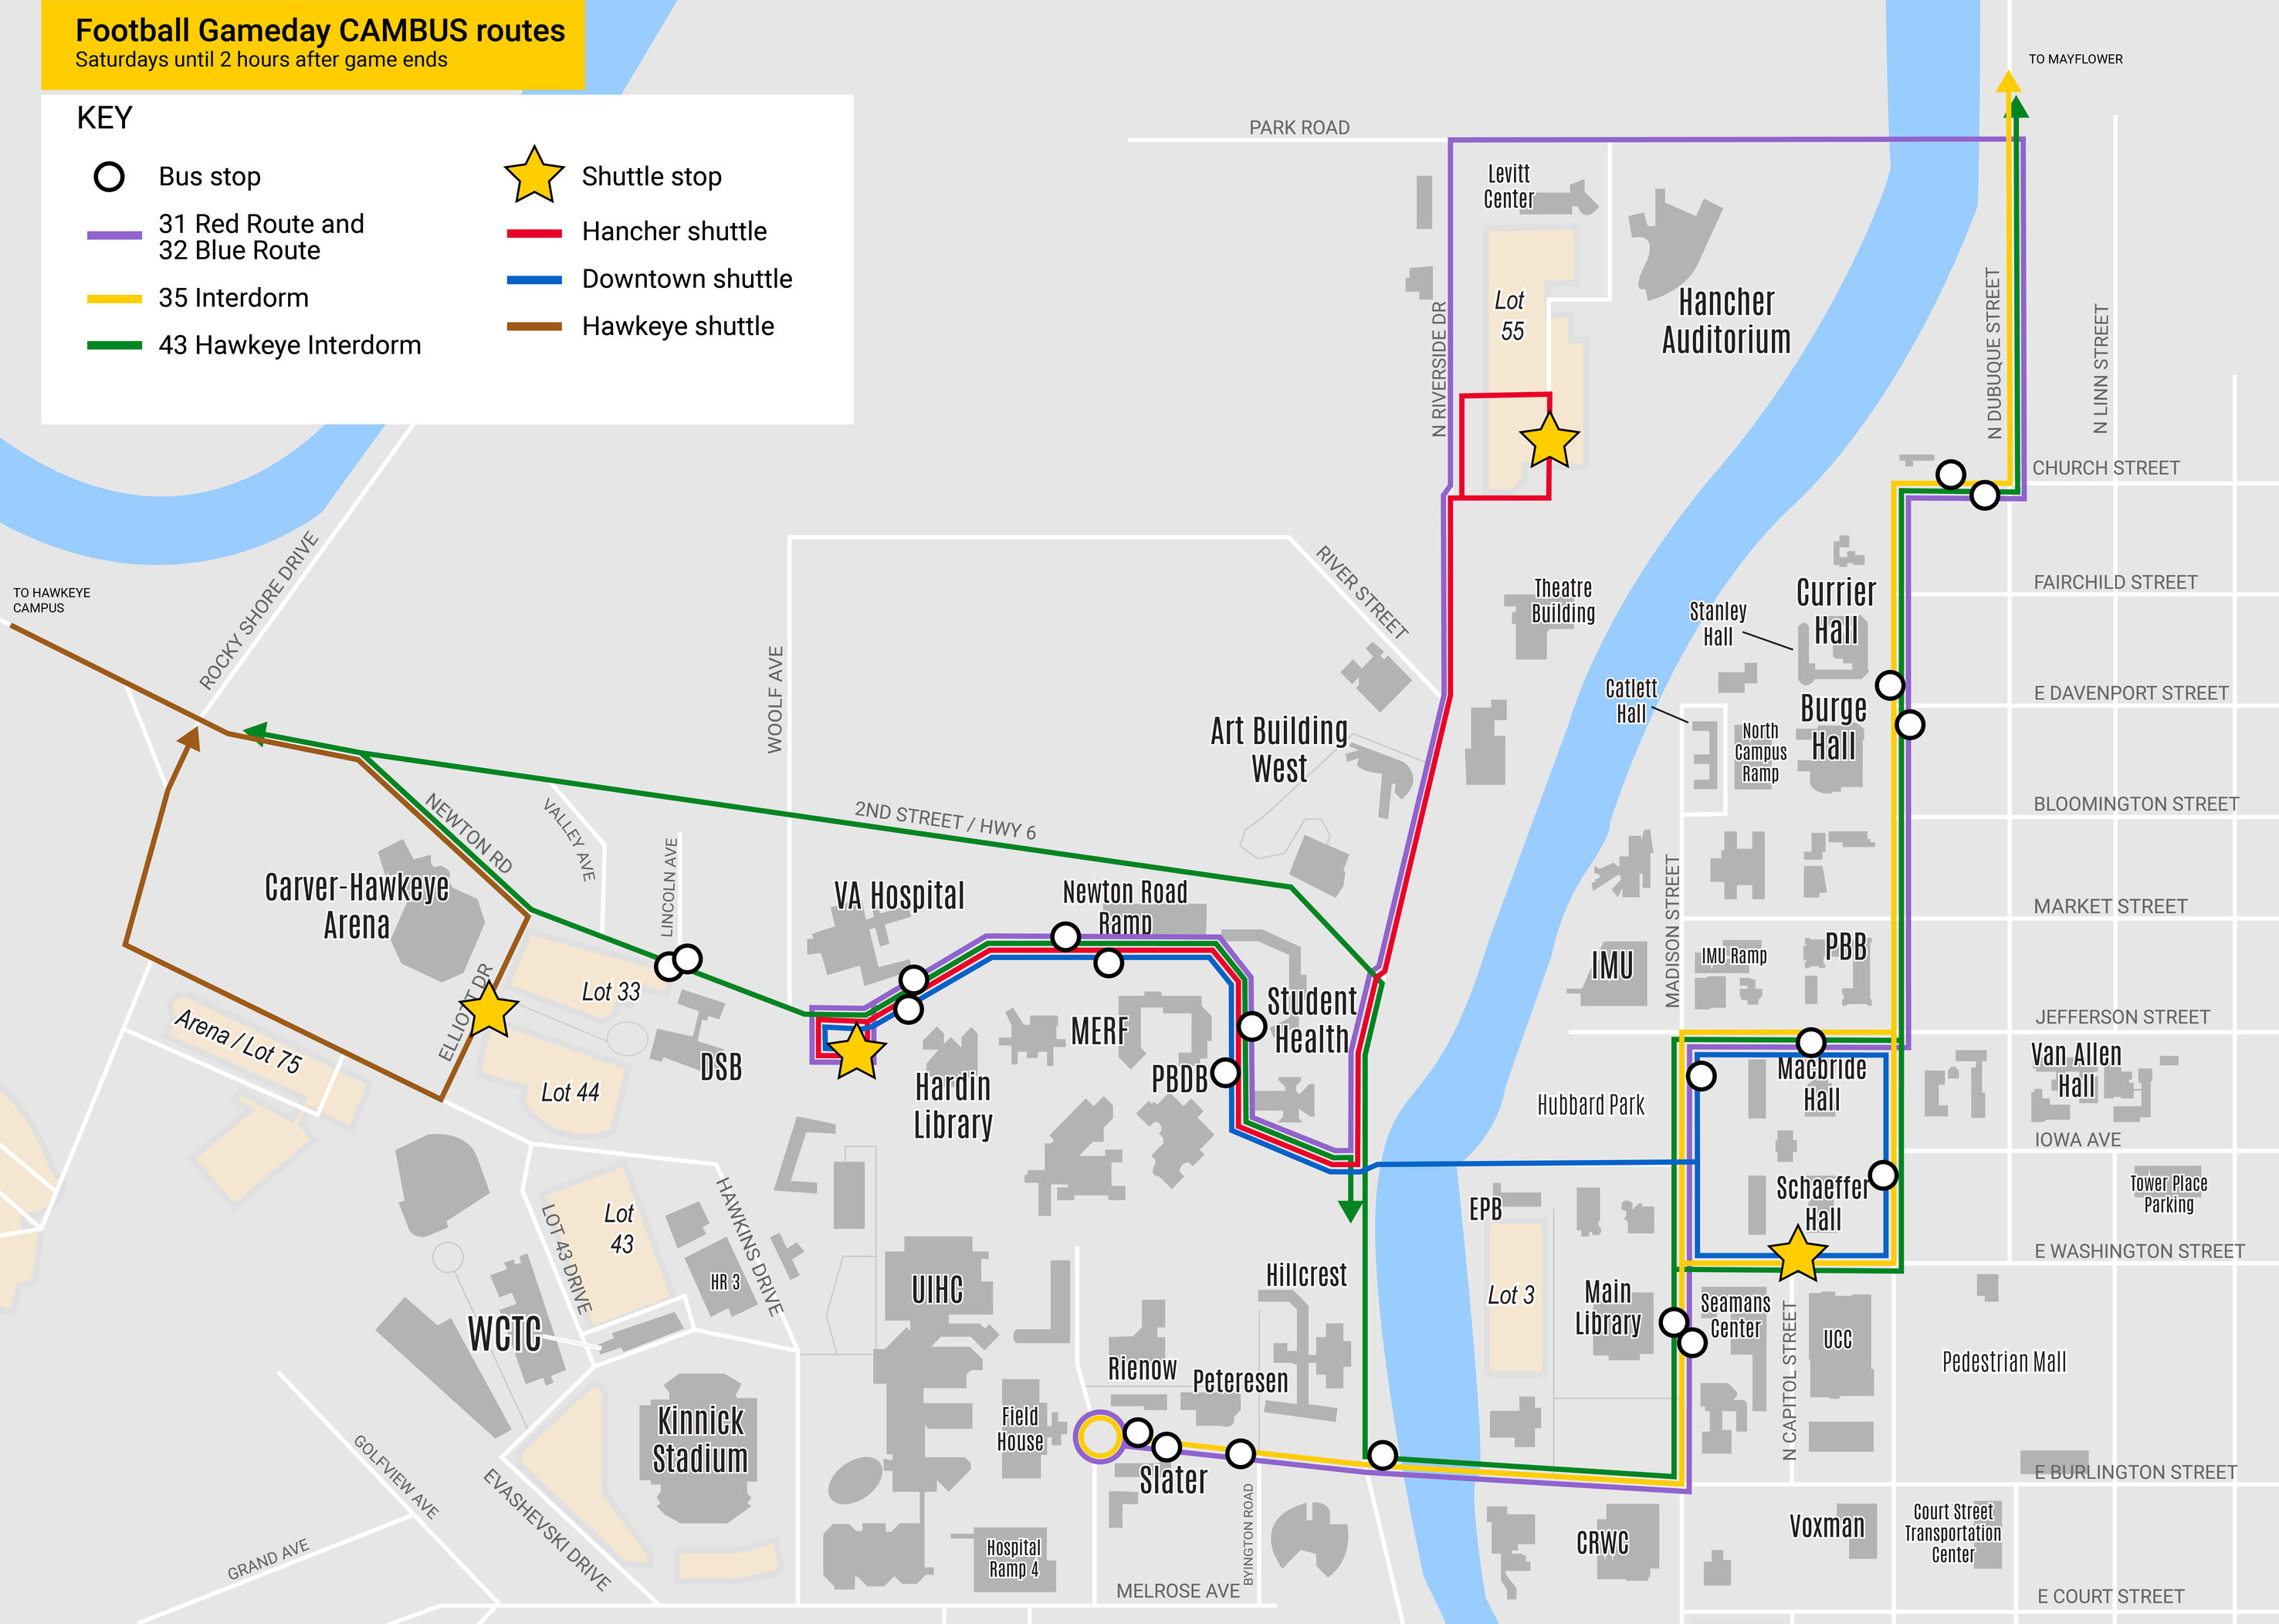 map of cambus routes on football game days